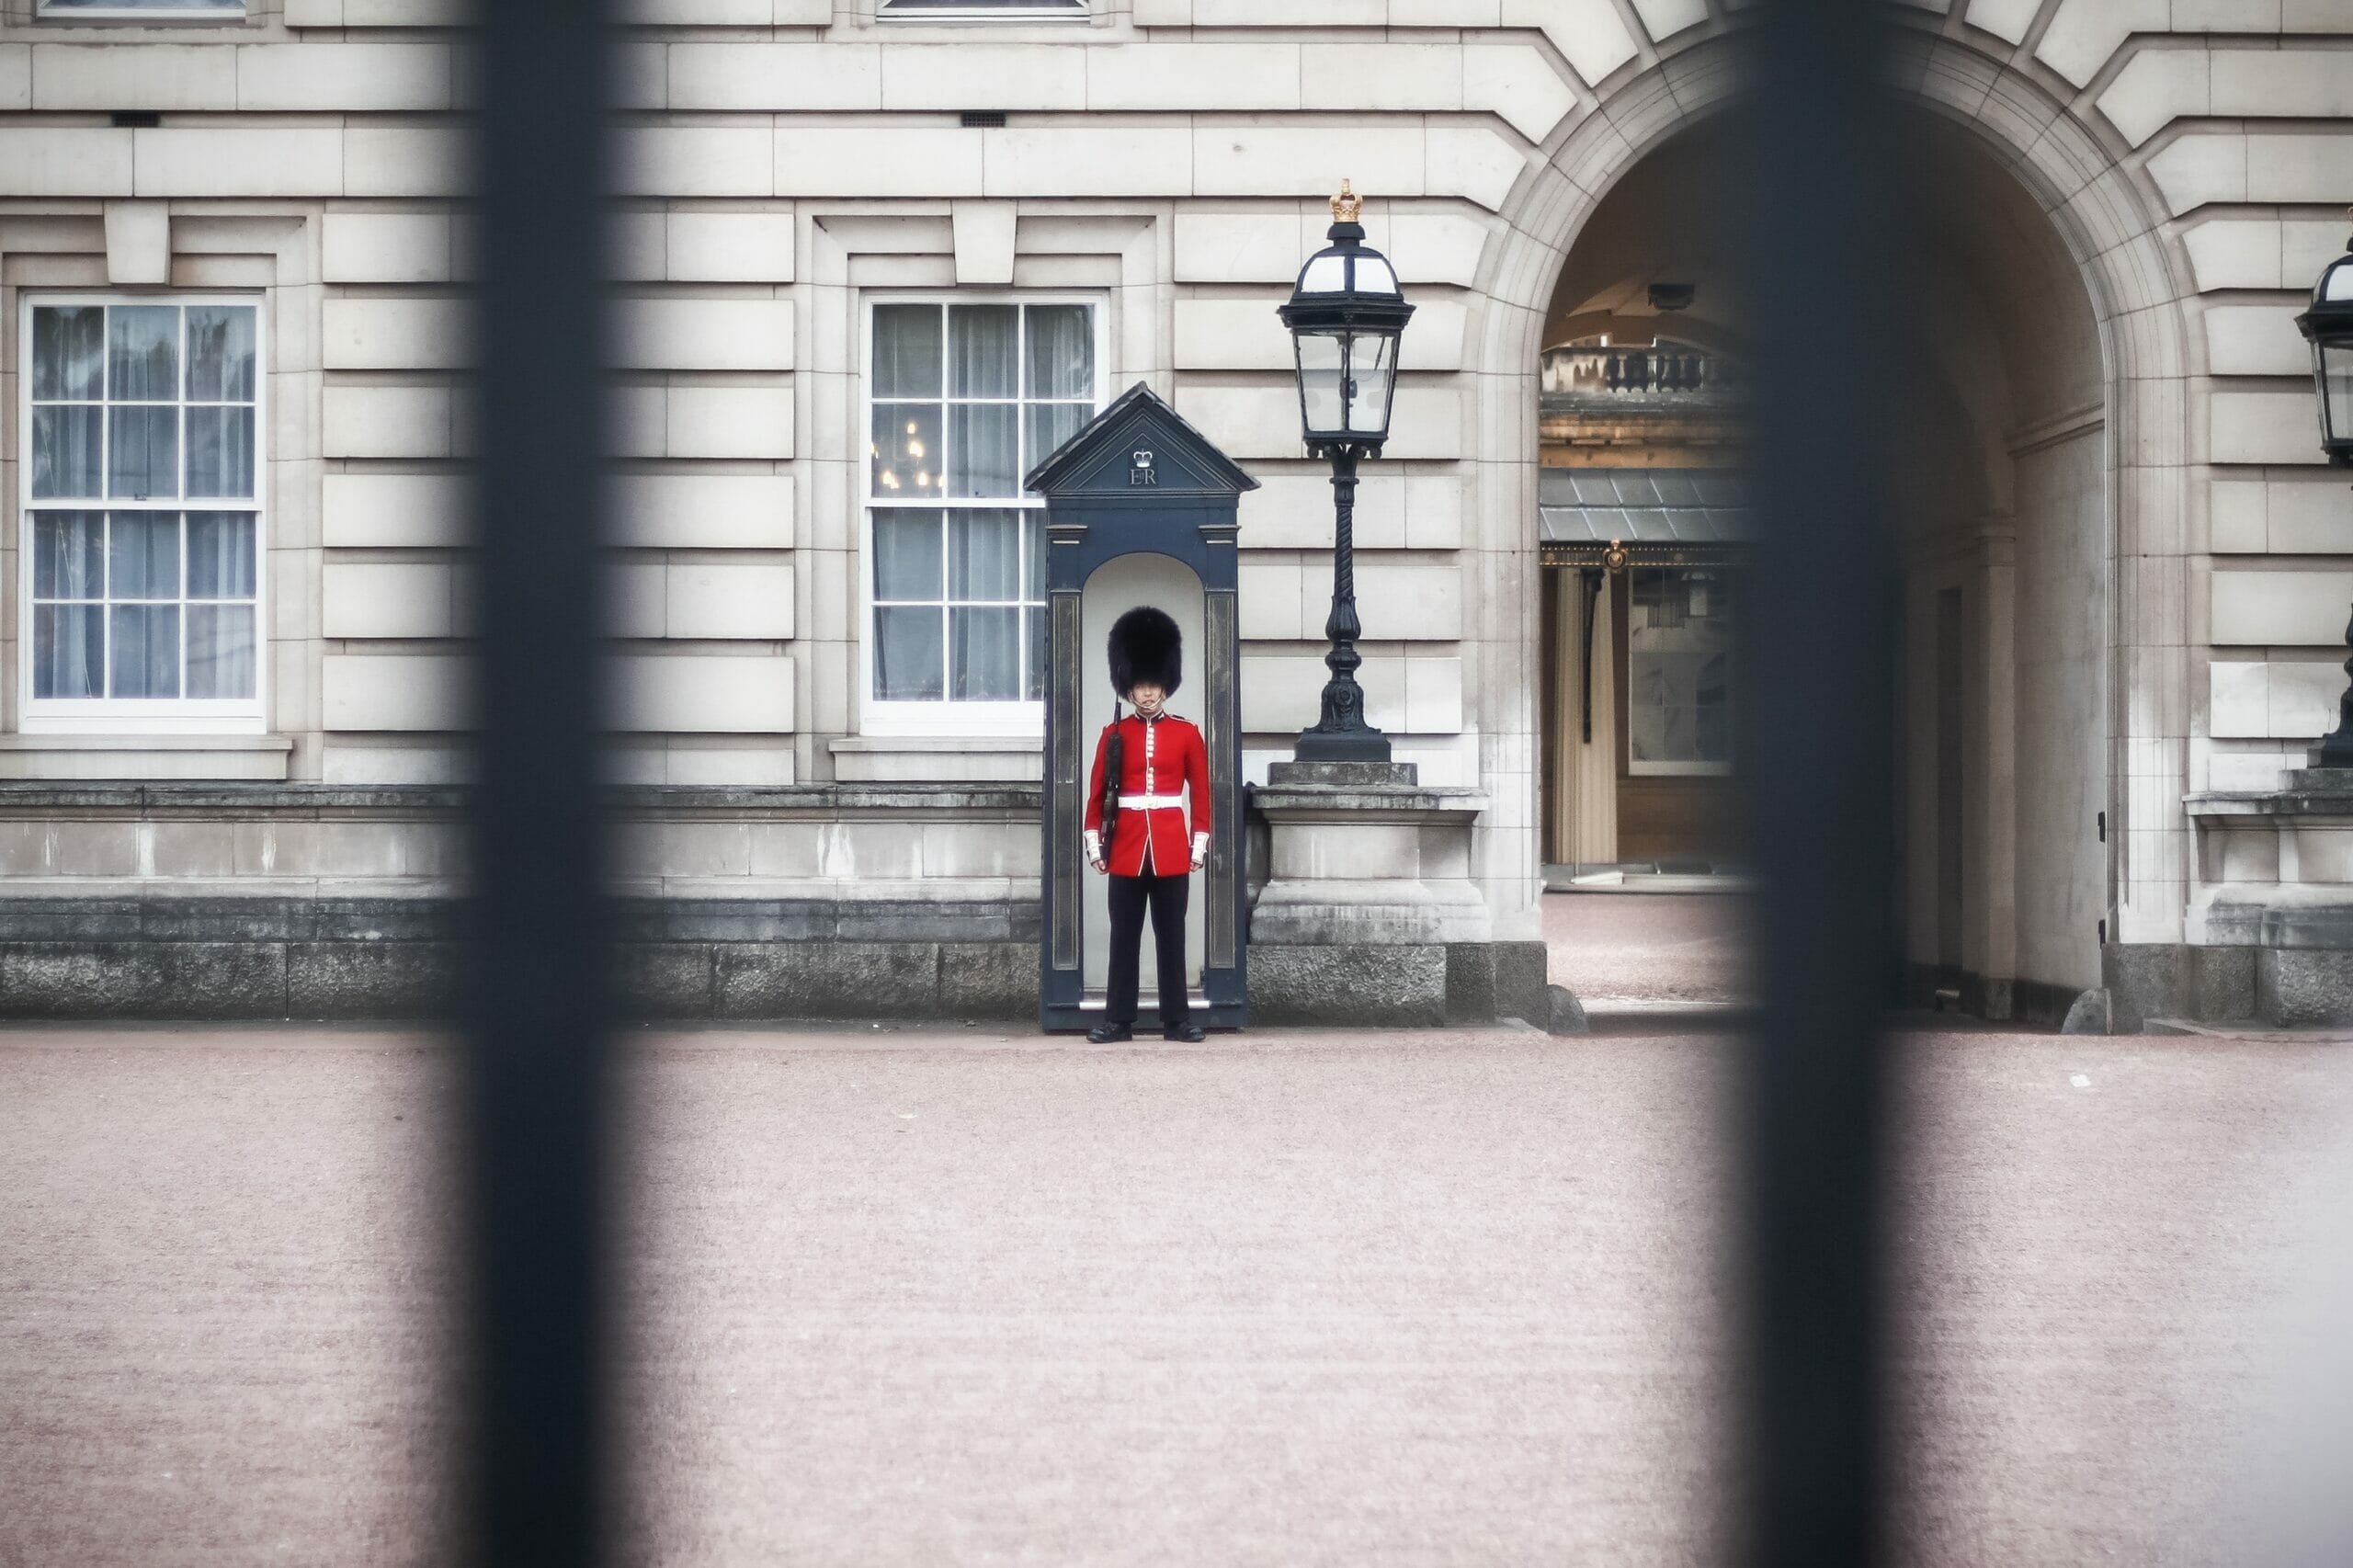 Guard in red at Buckingham Palace